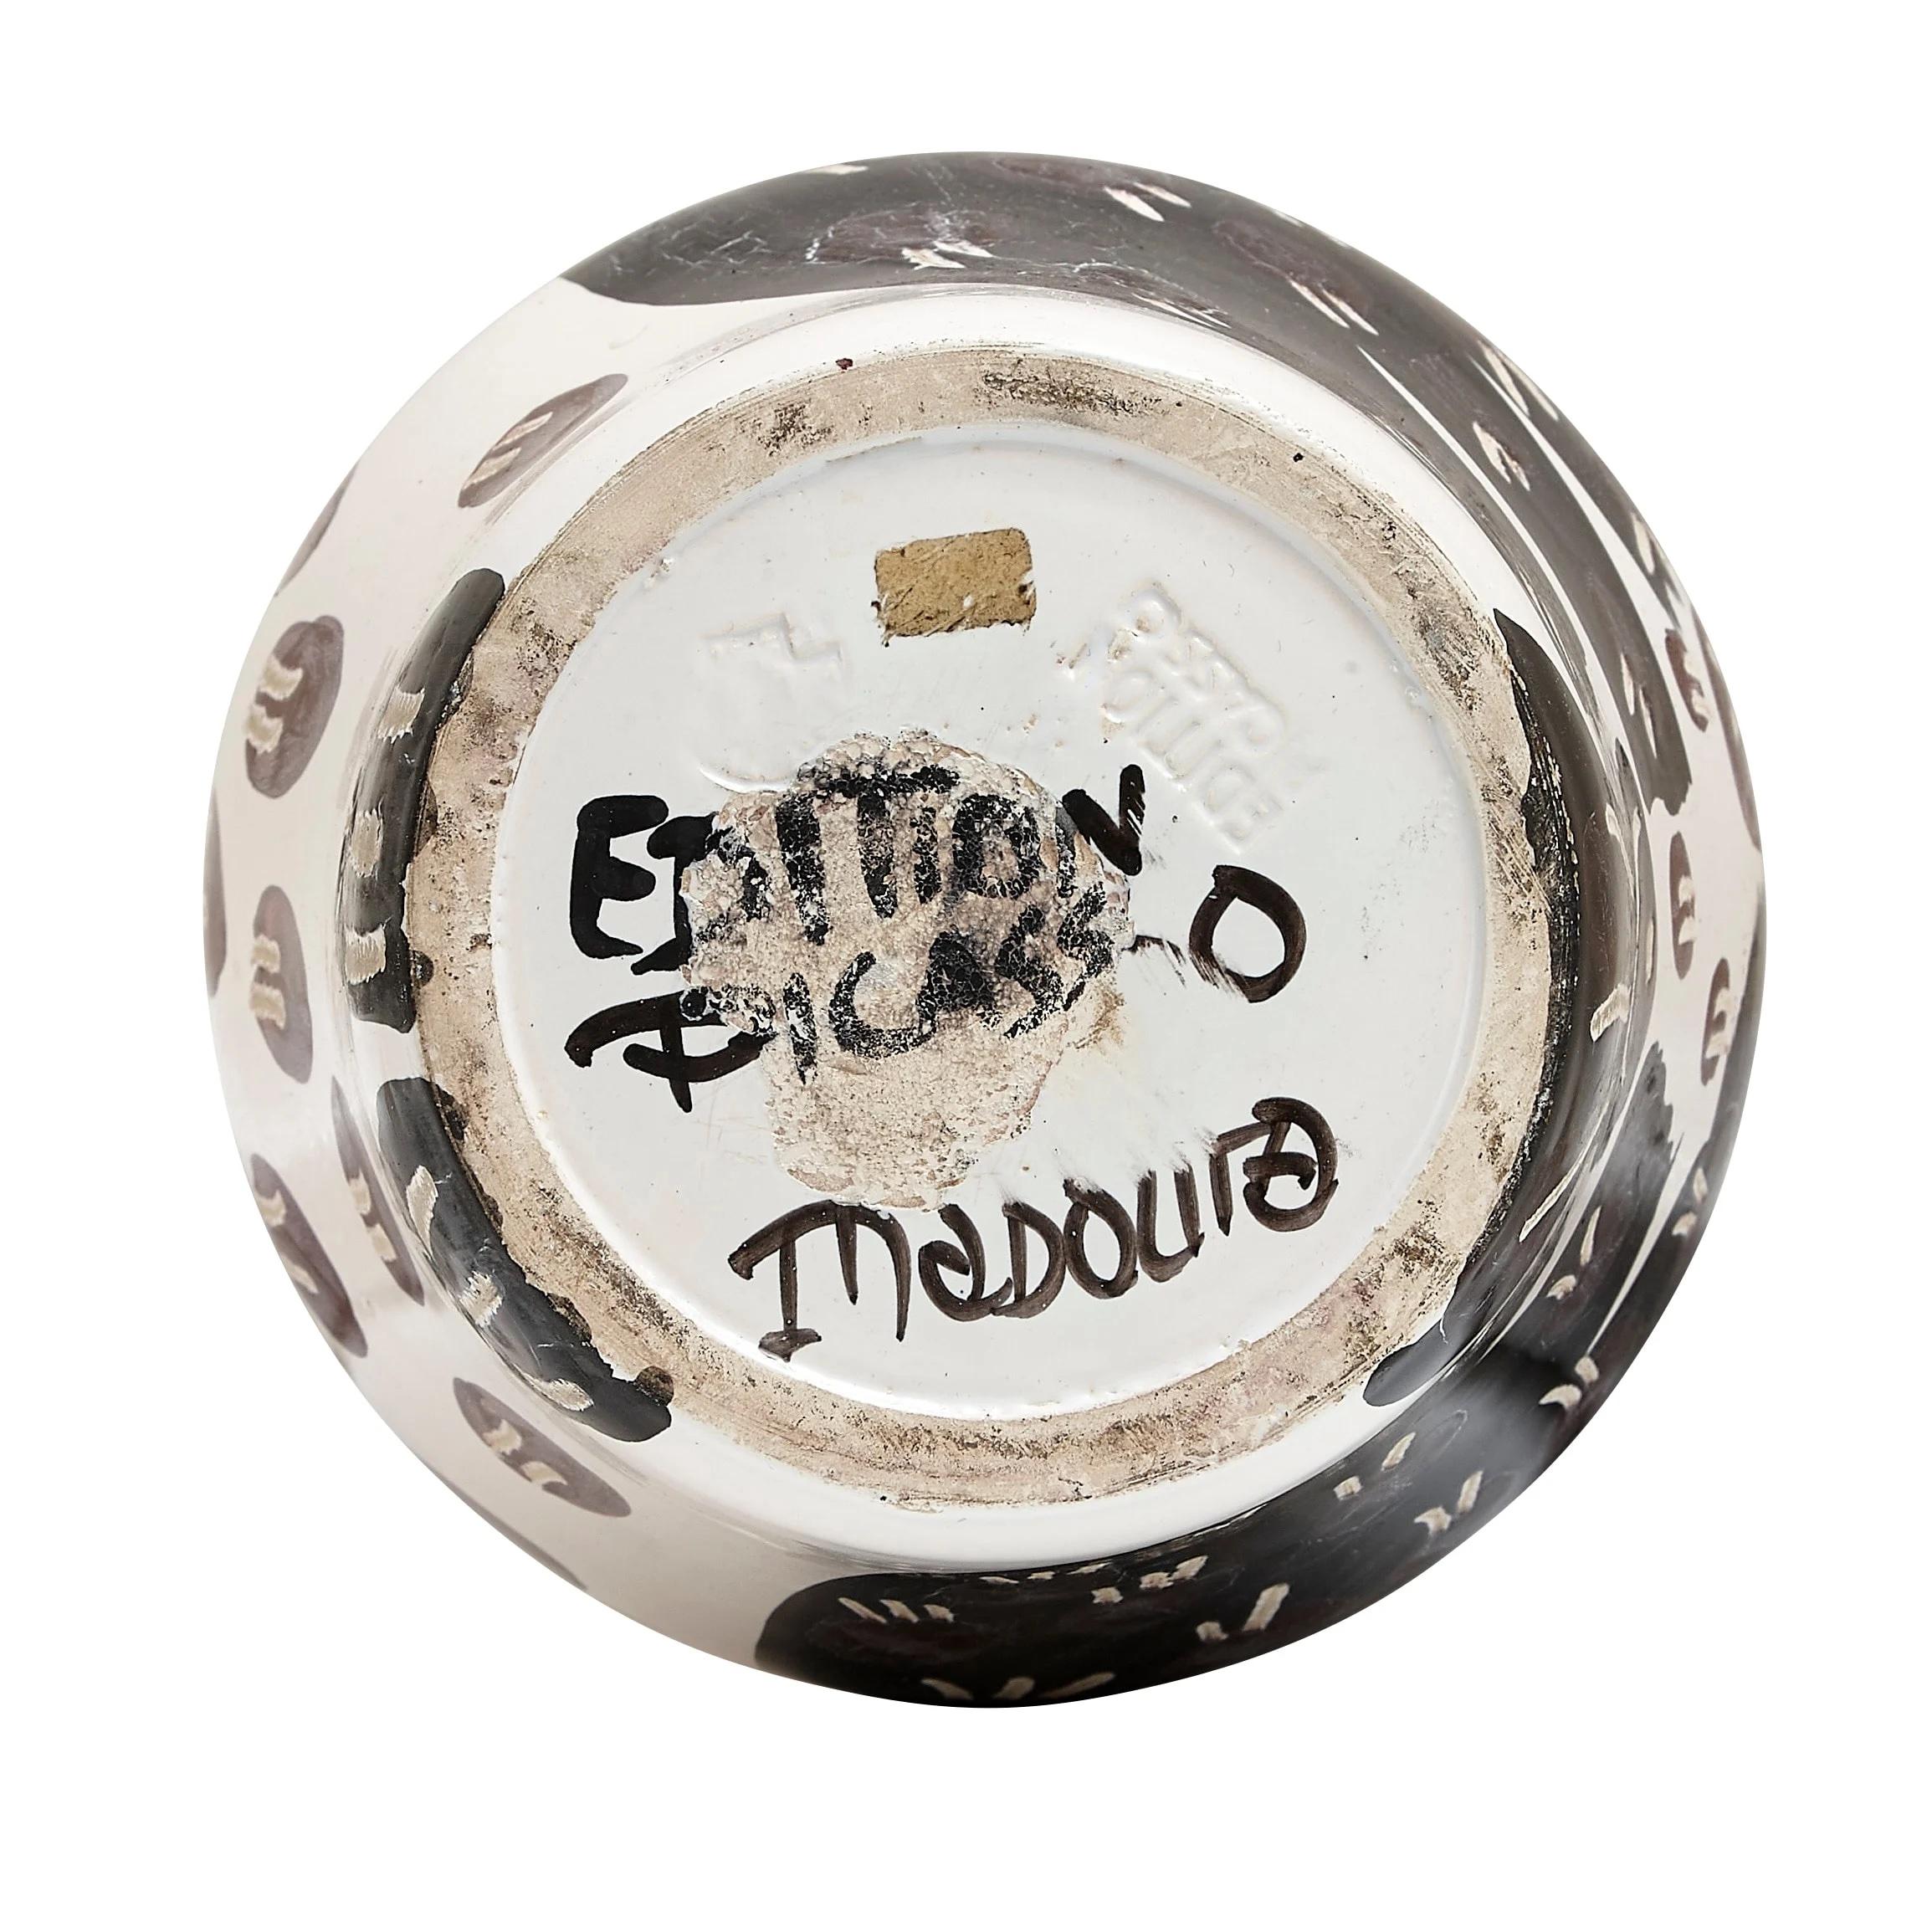 PABLO PICASSO (1881-1973) 
Hibou marron noir (A. R. 123)

Terre de faïence vase, 1951, from the edition of 300, inscribed 'Edition Picasso' and 'Madoura', glazed and painted, with the Edition Picasso and Madoura stamps.